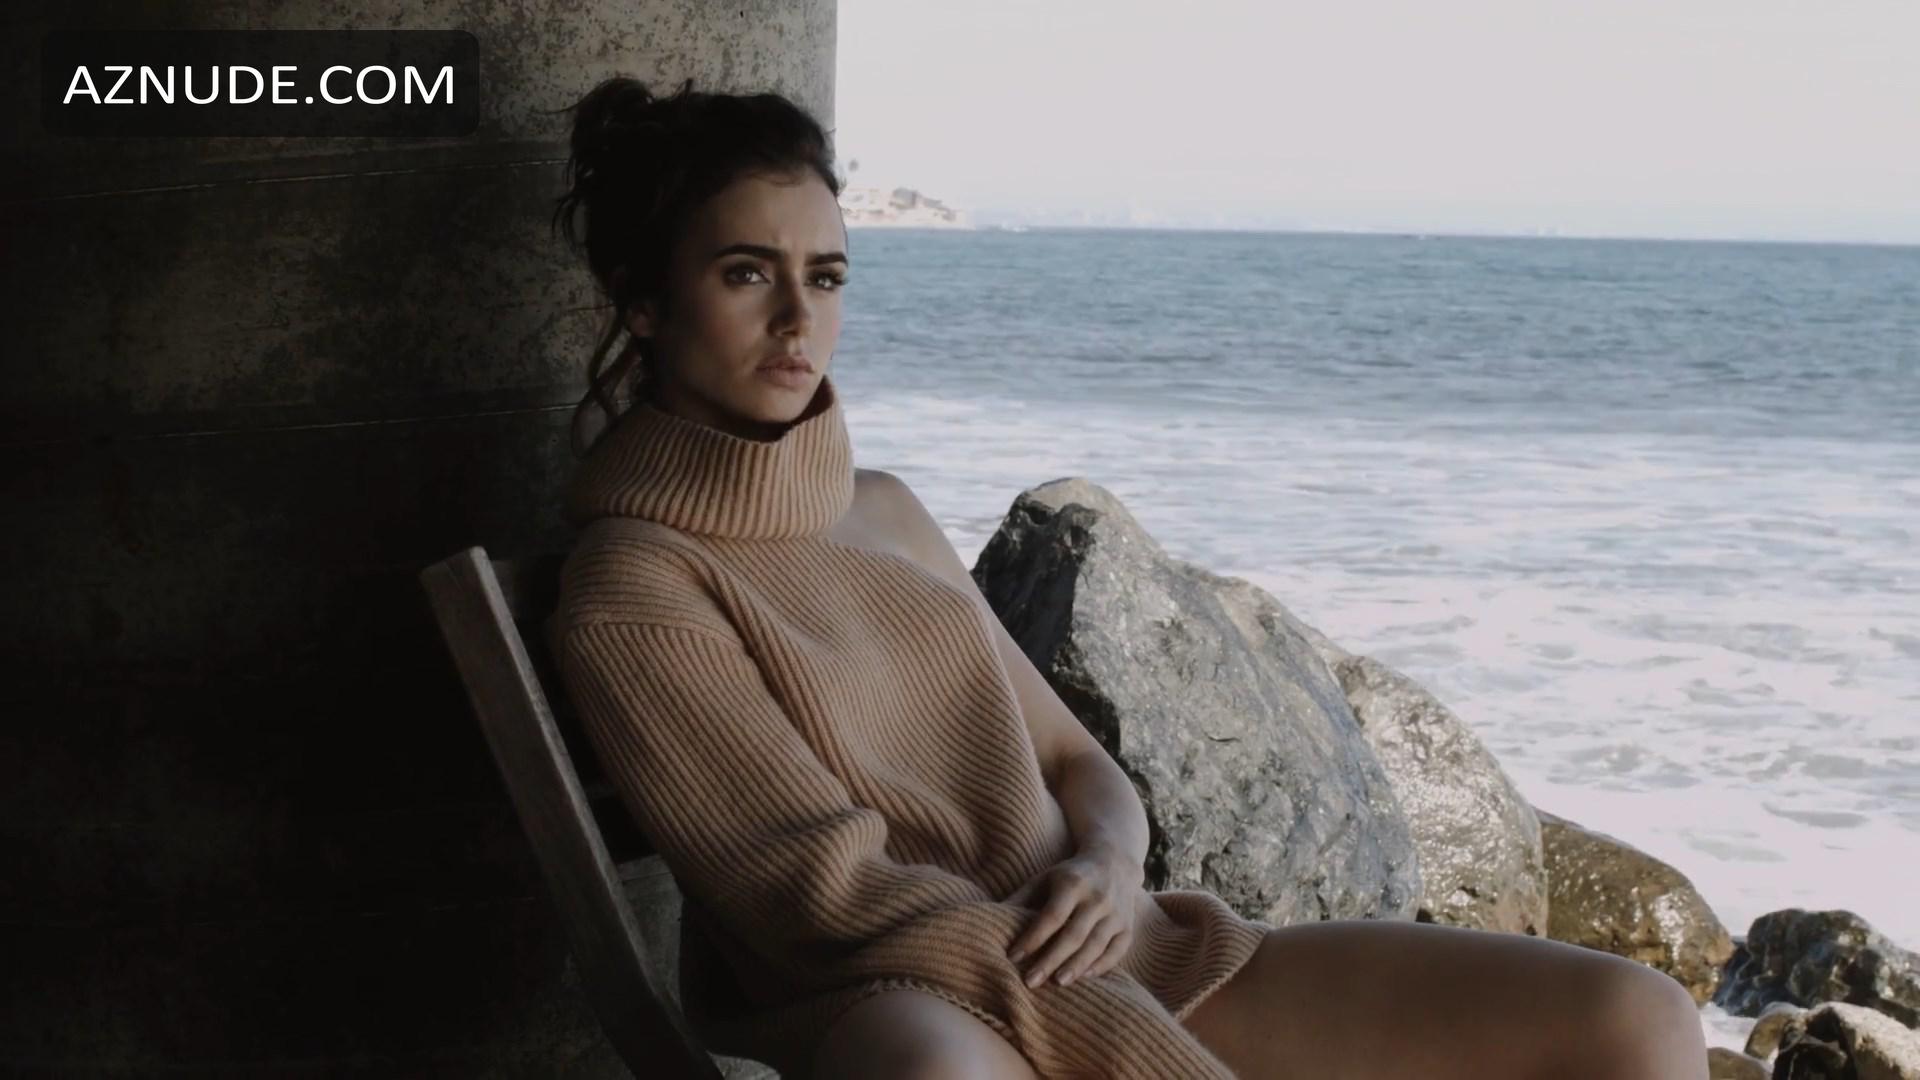 Lily Collins Sexy Actress Does Photoshoot Aznude